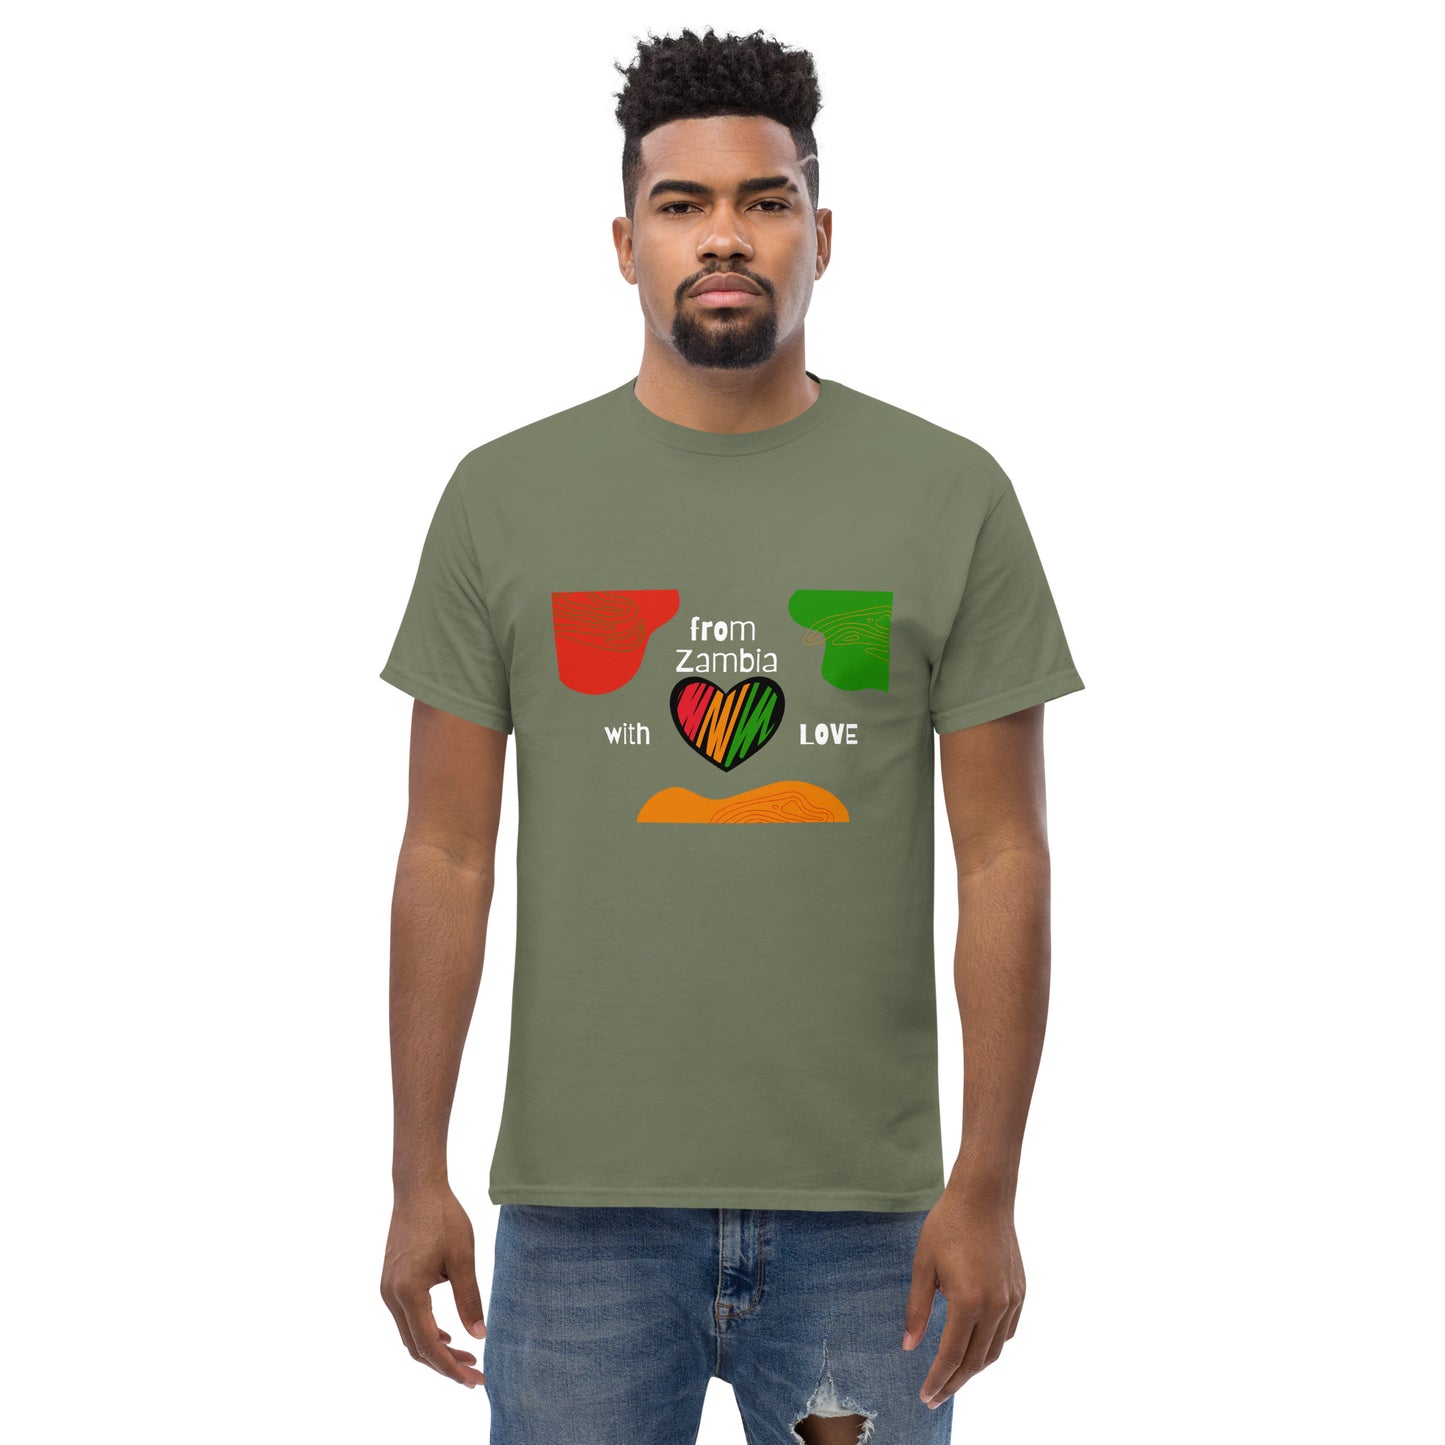 Men's classic From Zambia With Love t shirt